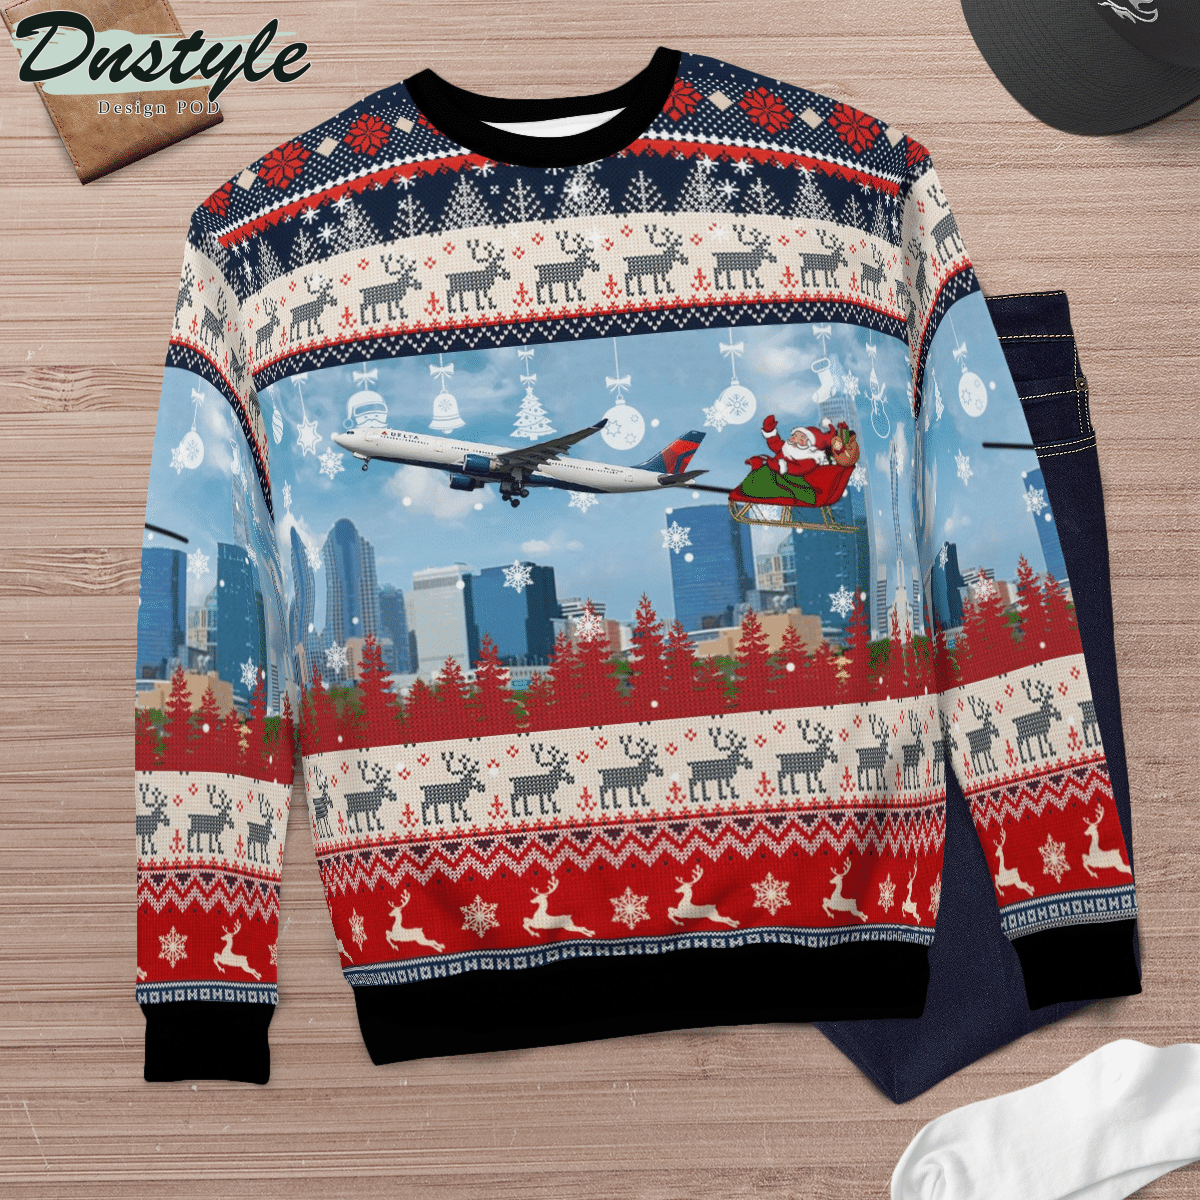 Delta Air Lines A330-300 With Santa Over Charlotte Ugly Christmas Sweater